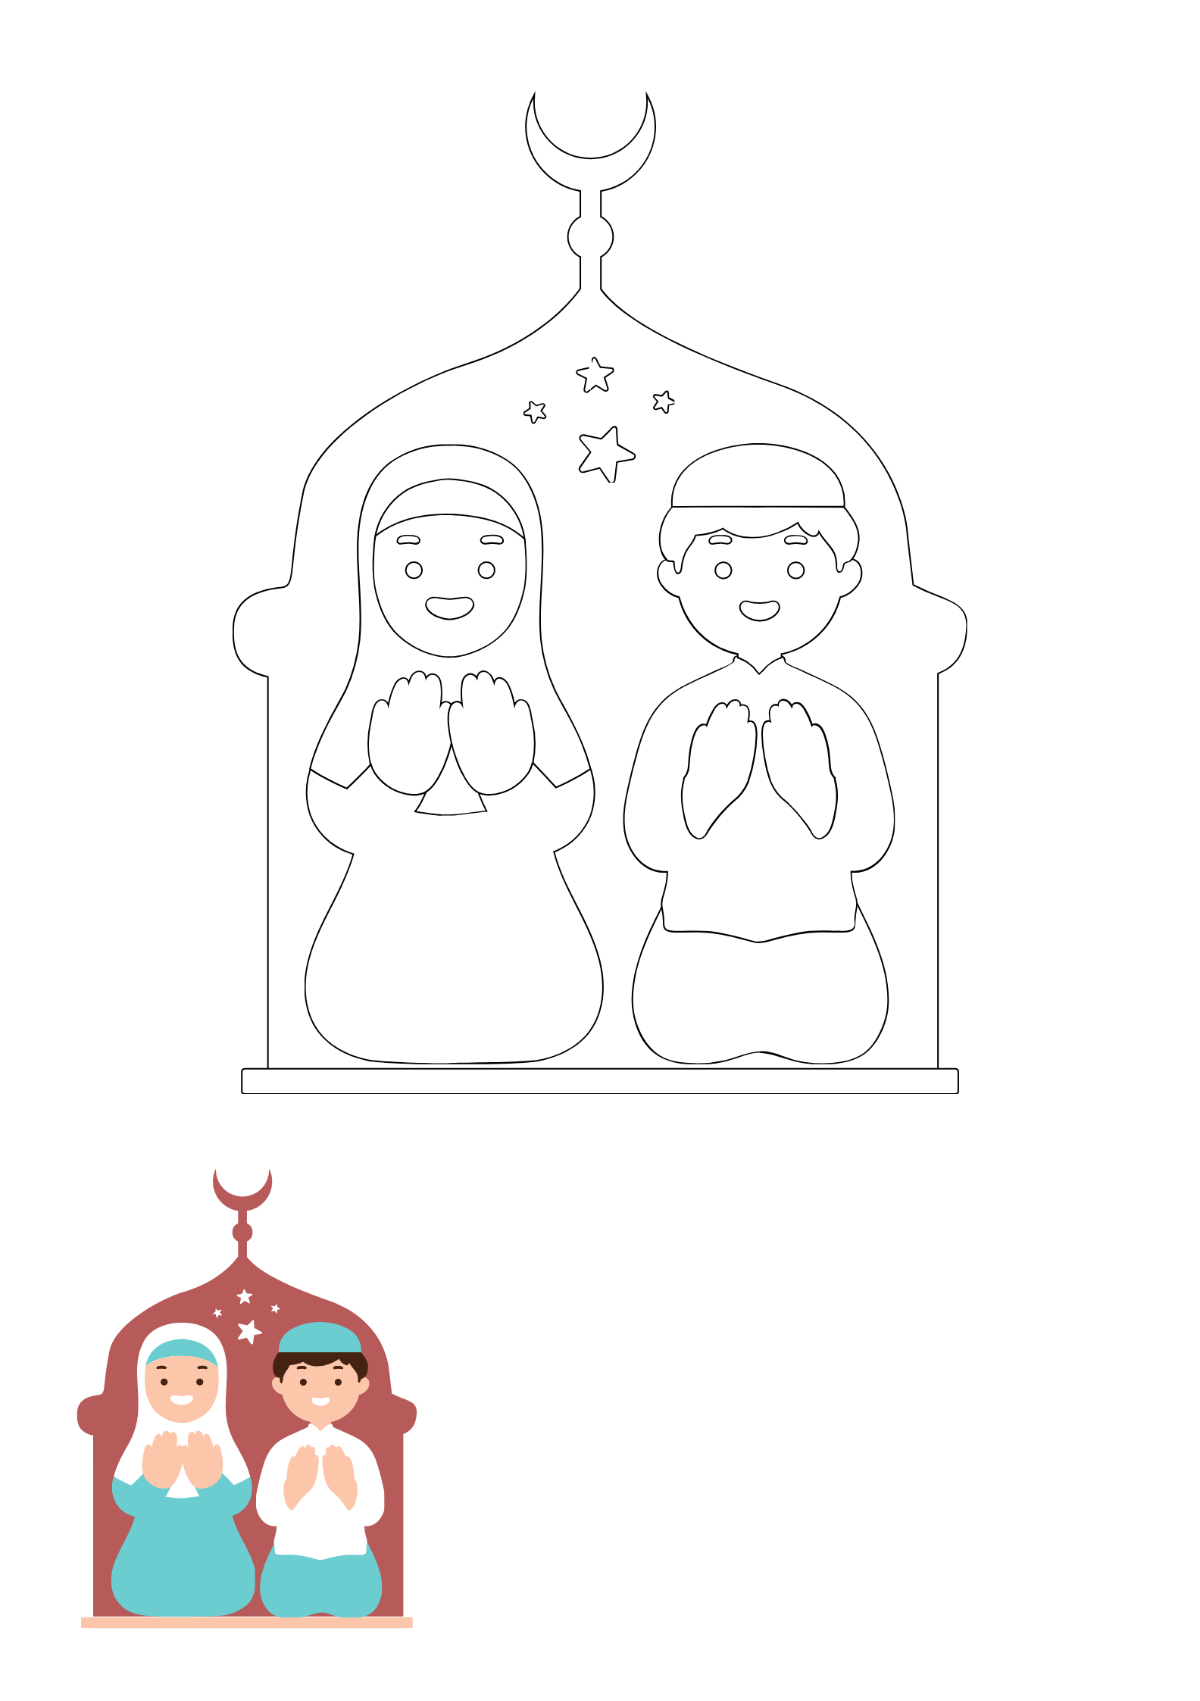 Free Eid Al Adha Coloring Page For Kids Template